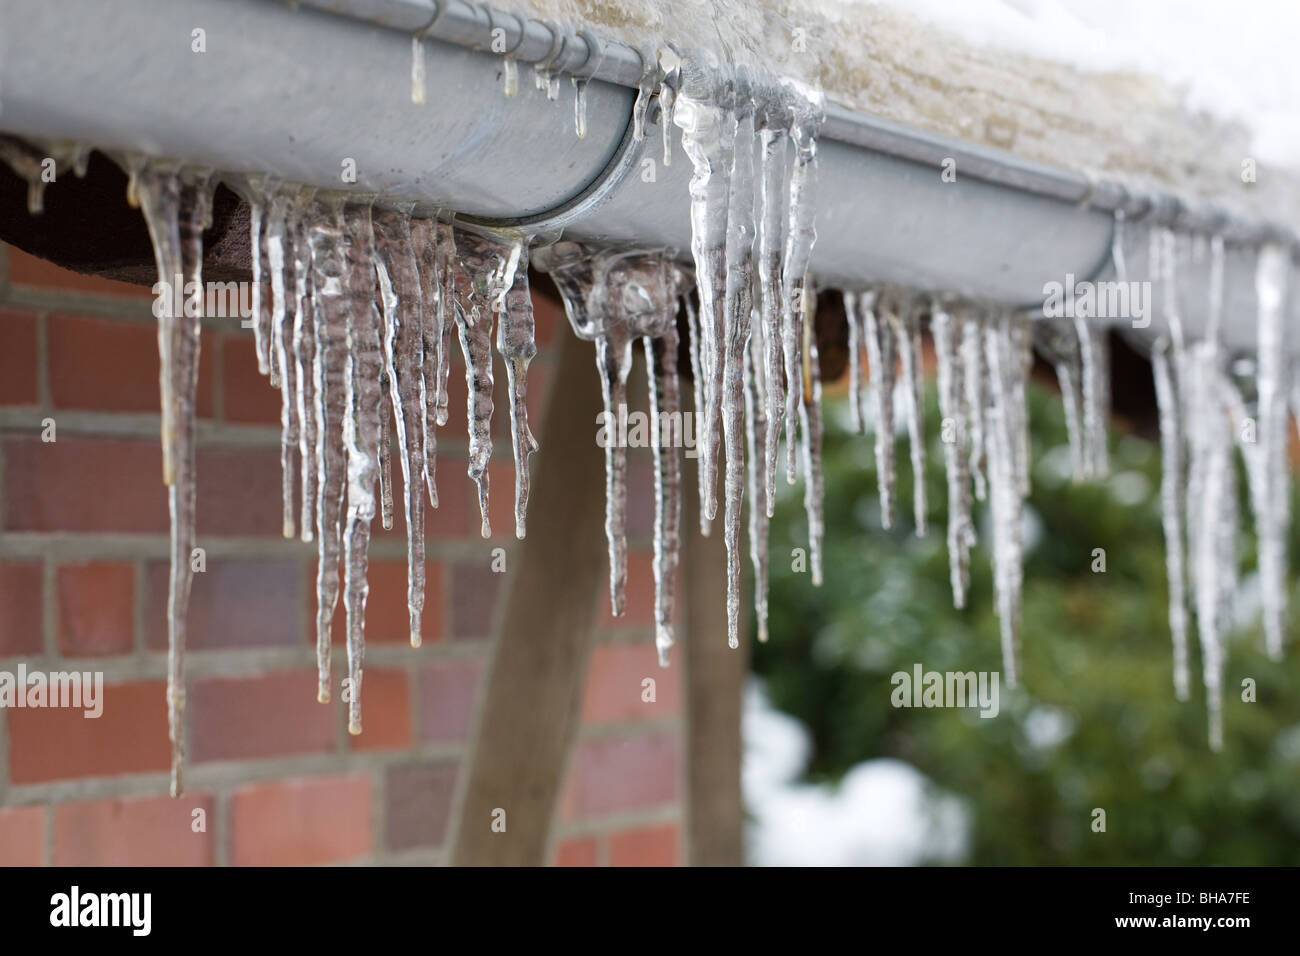 Roof gutter full of icicles during winter 2009/2010 in Germany Stock Photo